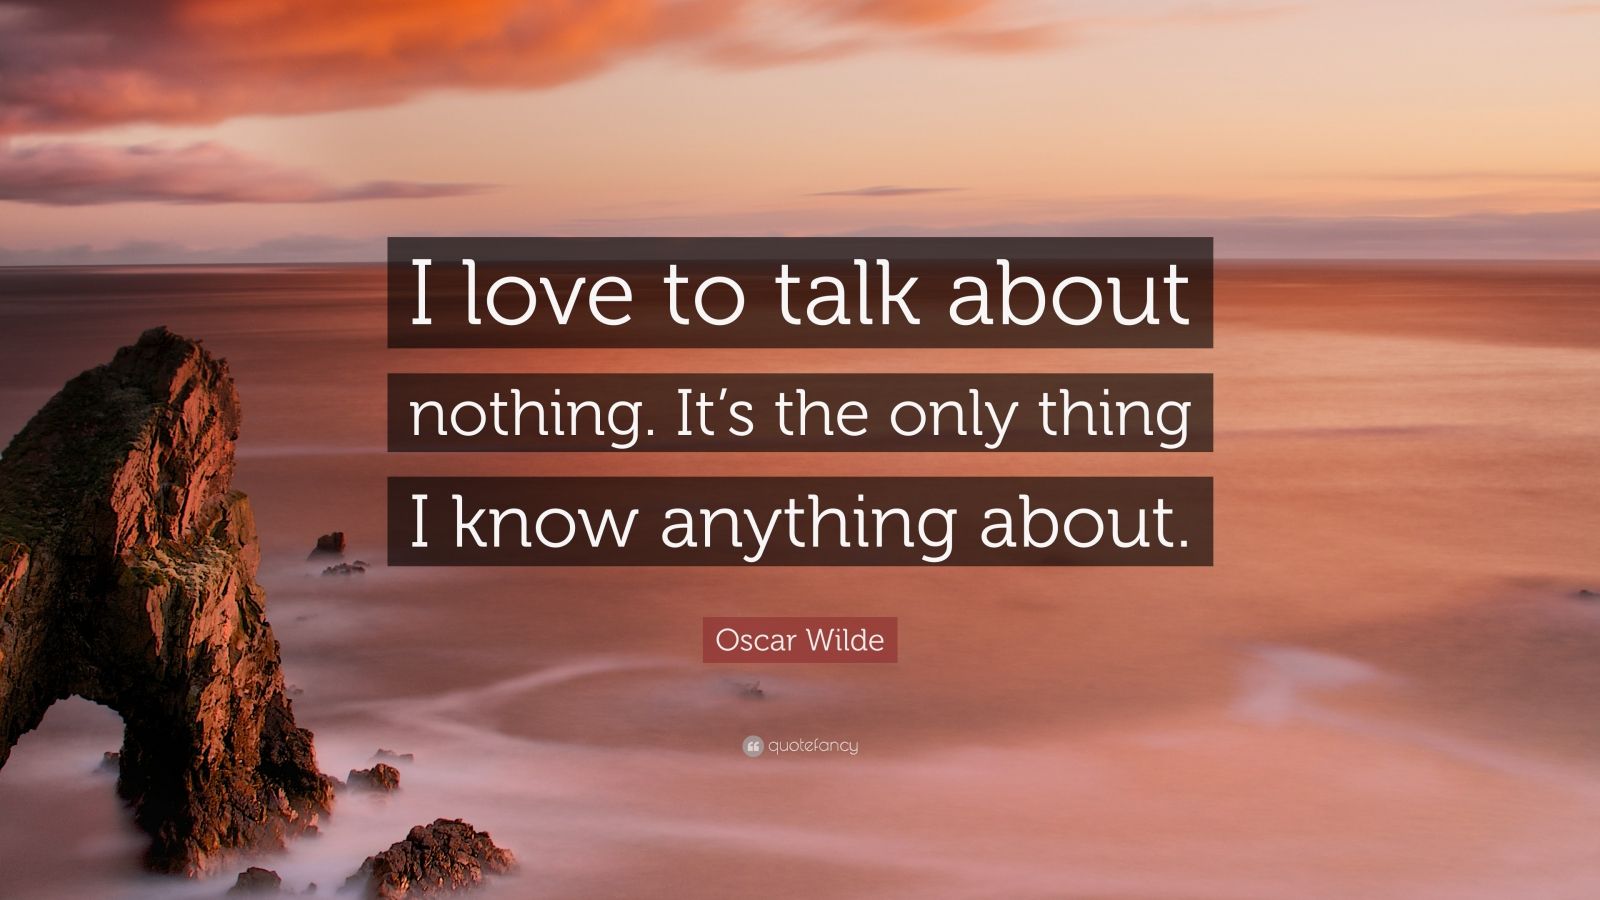 Oscar Wilde Quote: "I love to talk about nothing. It's the only thing I know anything about ...